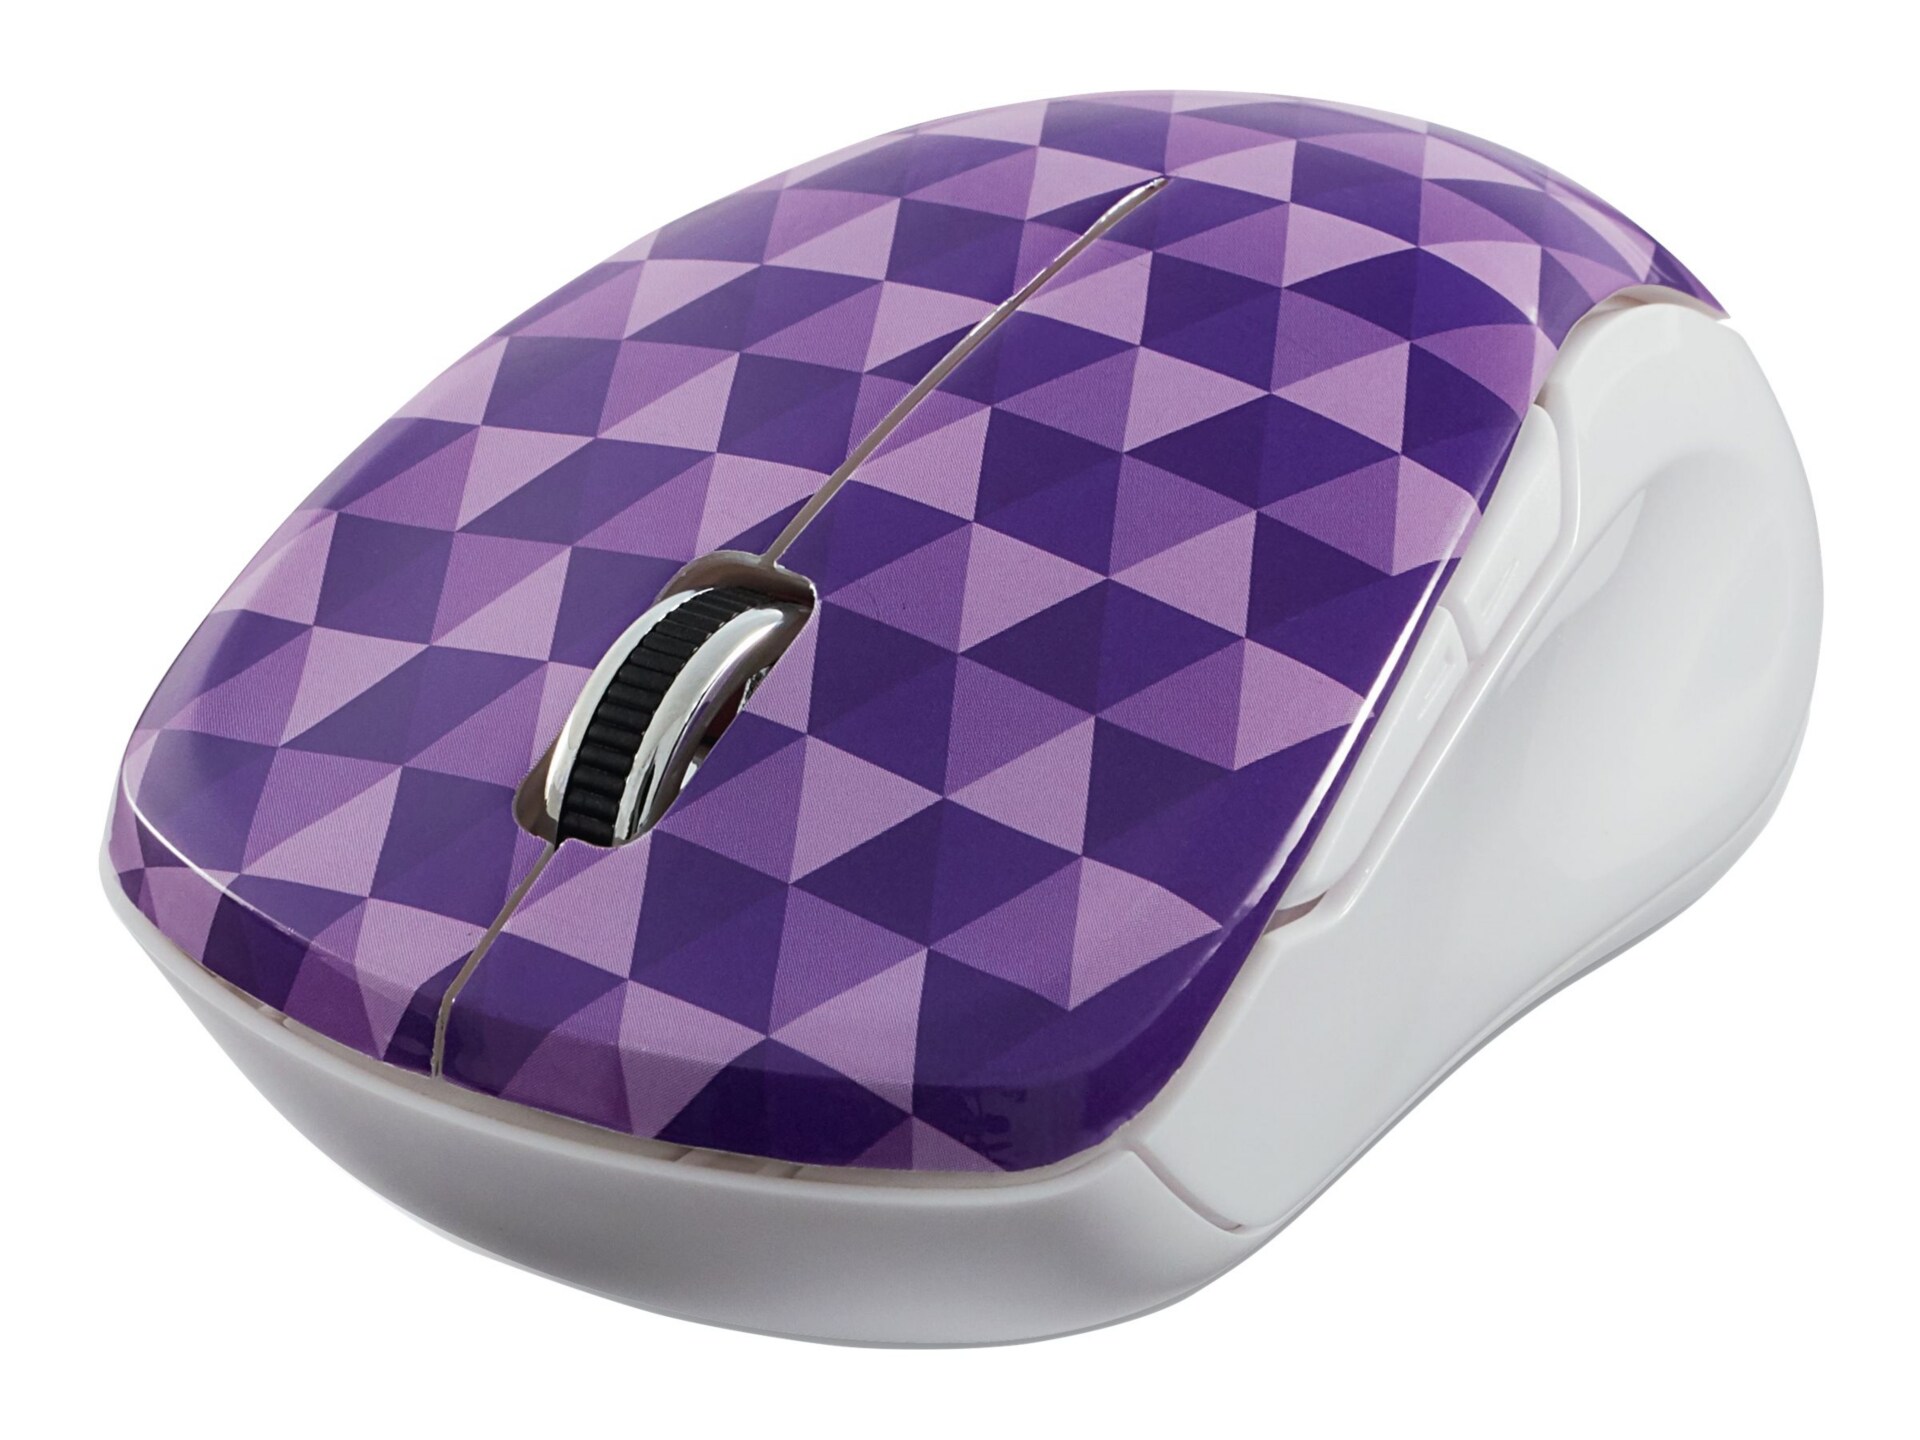 Verbatim Wireless Notebook Multi-Trac Blue LED Mouse - mouse - 2.4 GHz - pu